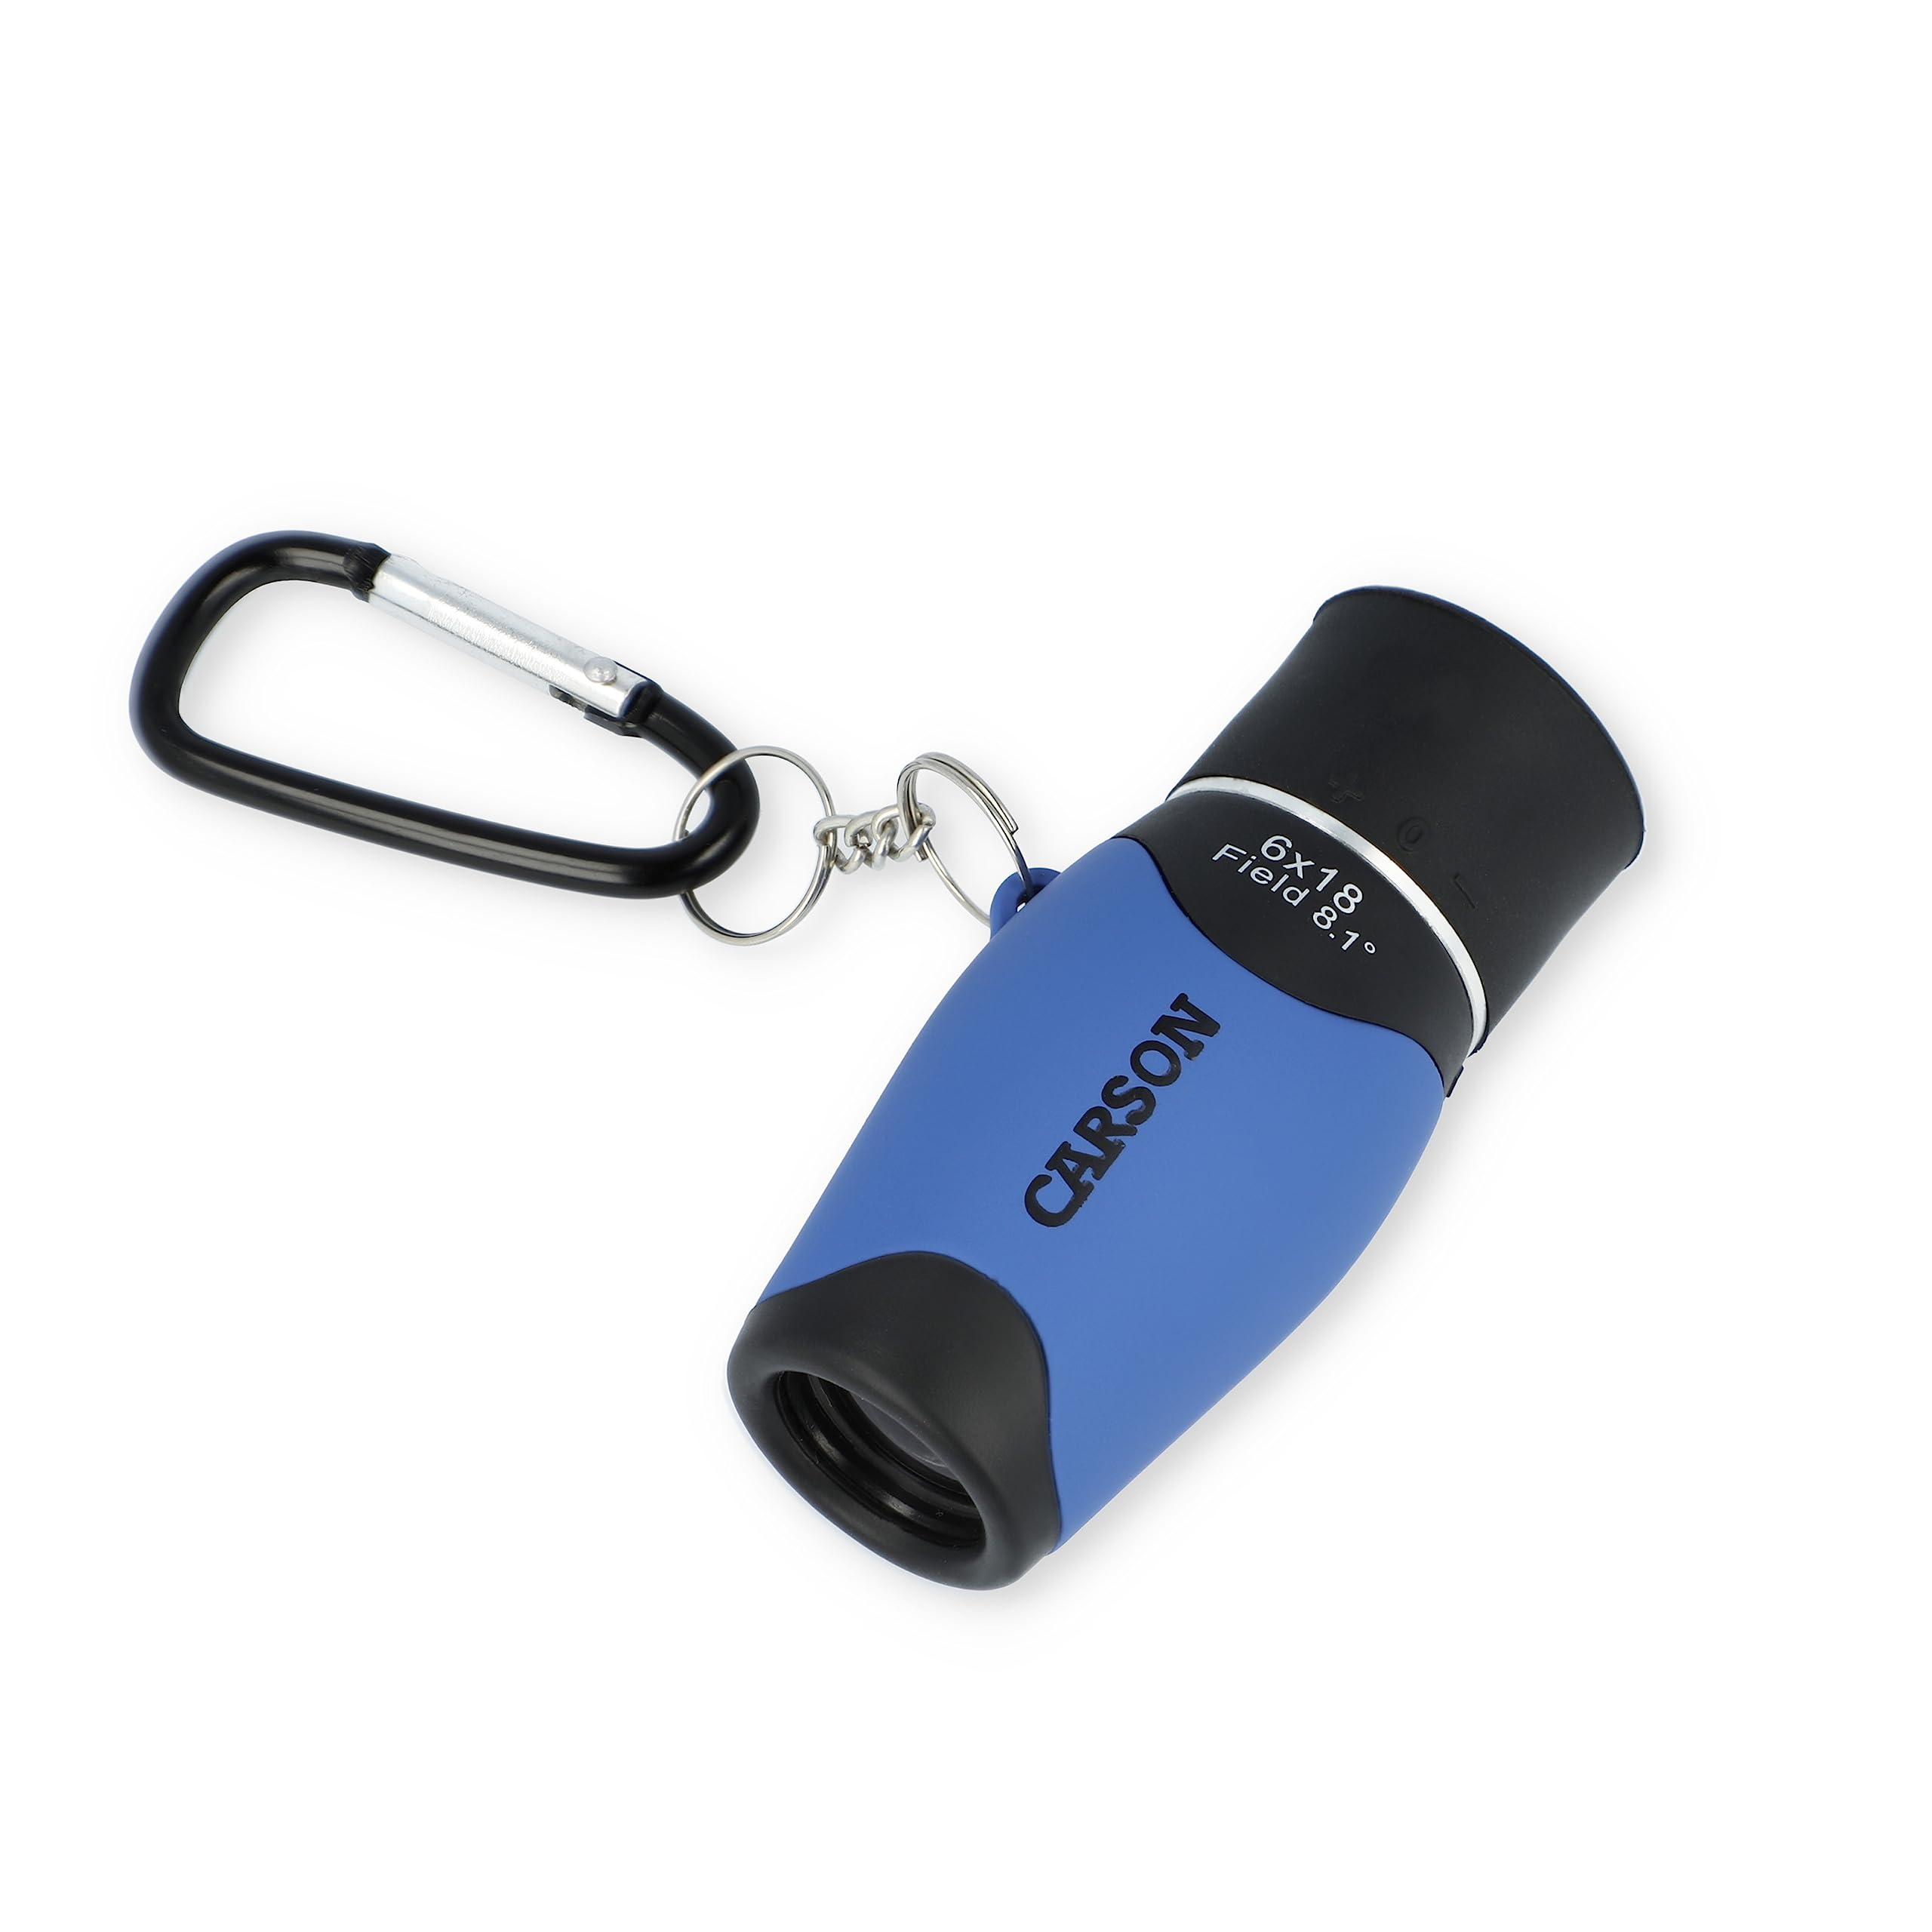 Carson MiniMight 6x18mm Pocket Monocular with Carabiner Clip, Blue (MM-618CB)